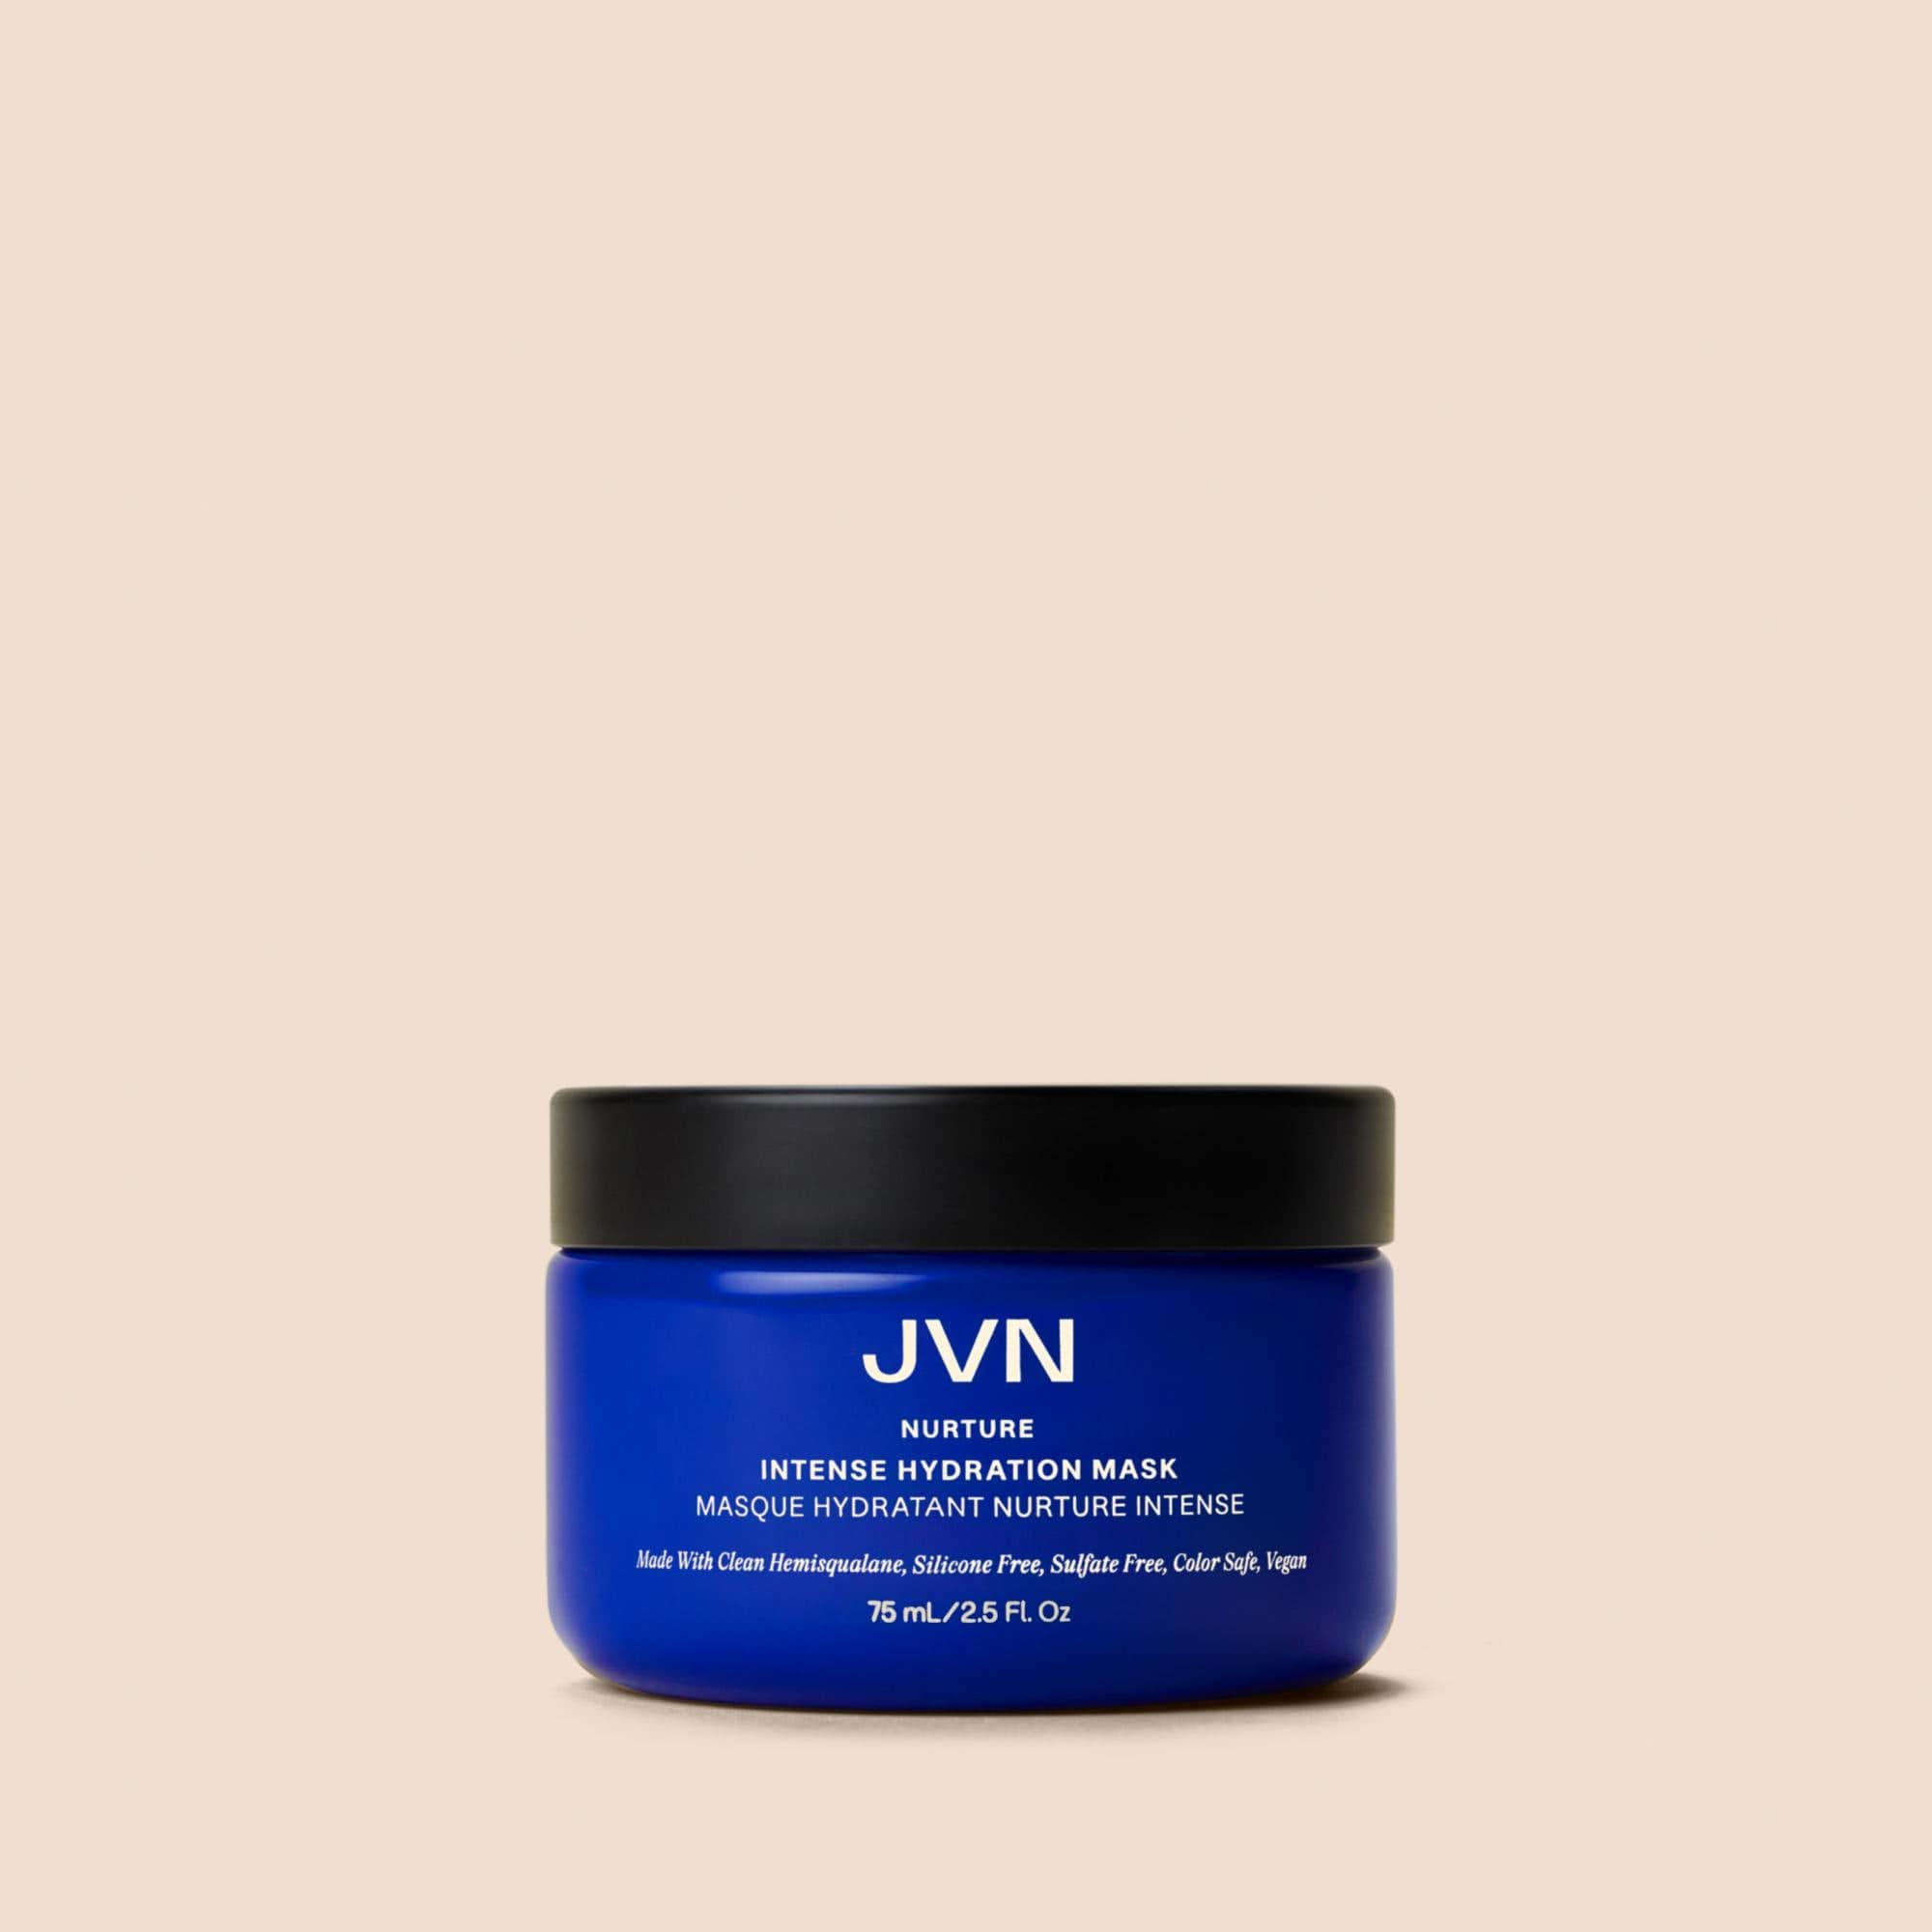 JVN Treatment Nurture Intense Hydration Mask Travel Size 2.5 oz 75ml sulfate-free silicone-free sustainable